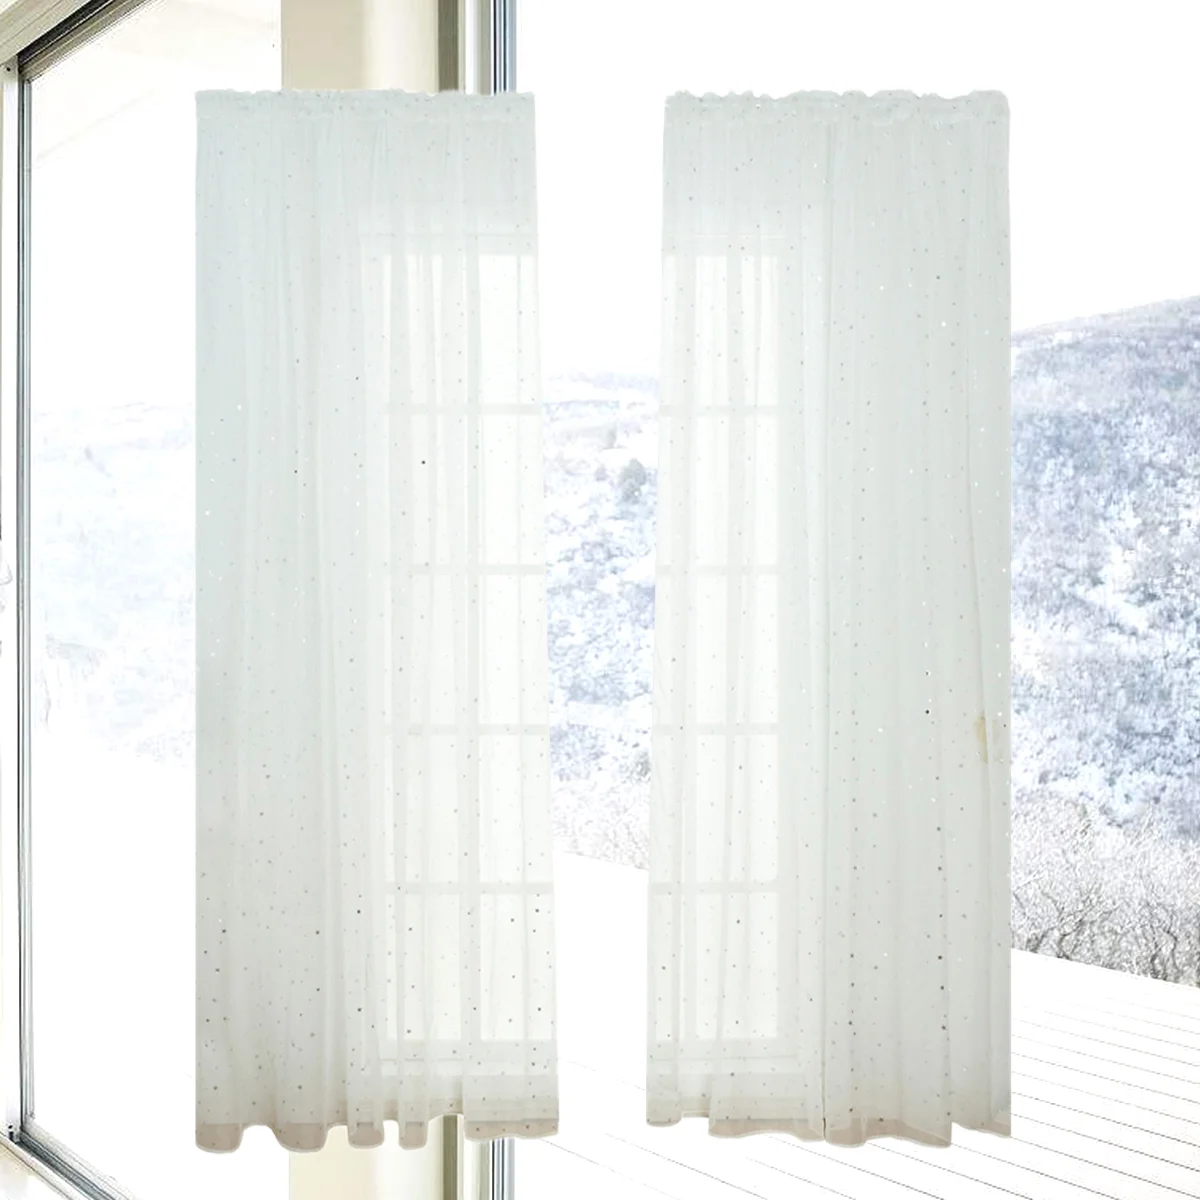 

Curtains Window Sheer Curtain Voile Star Drapes Room Tulle Bedroom Screen Girls Inches Living Kids Panels Screening Linen White